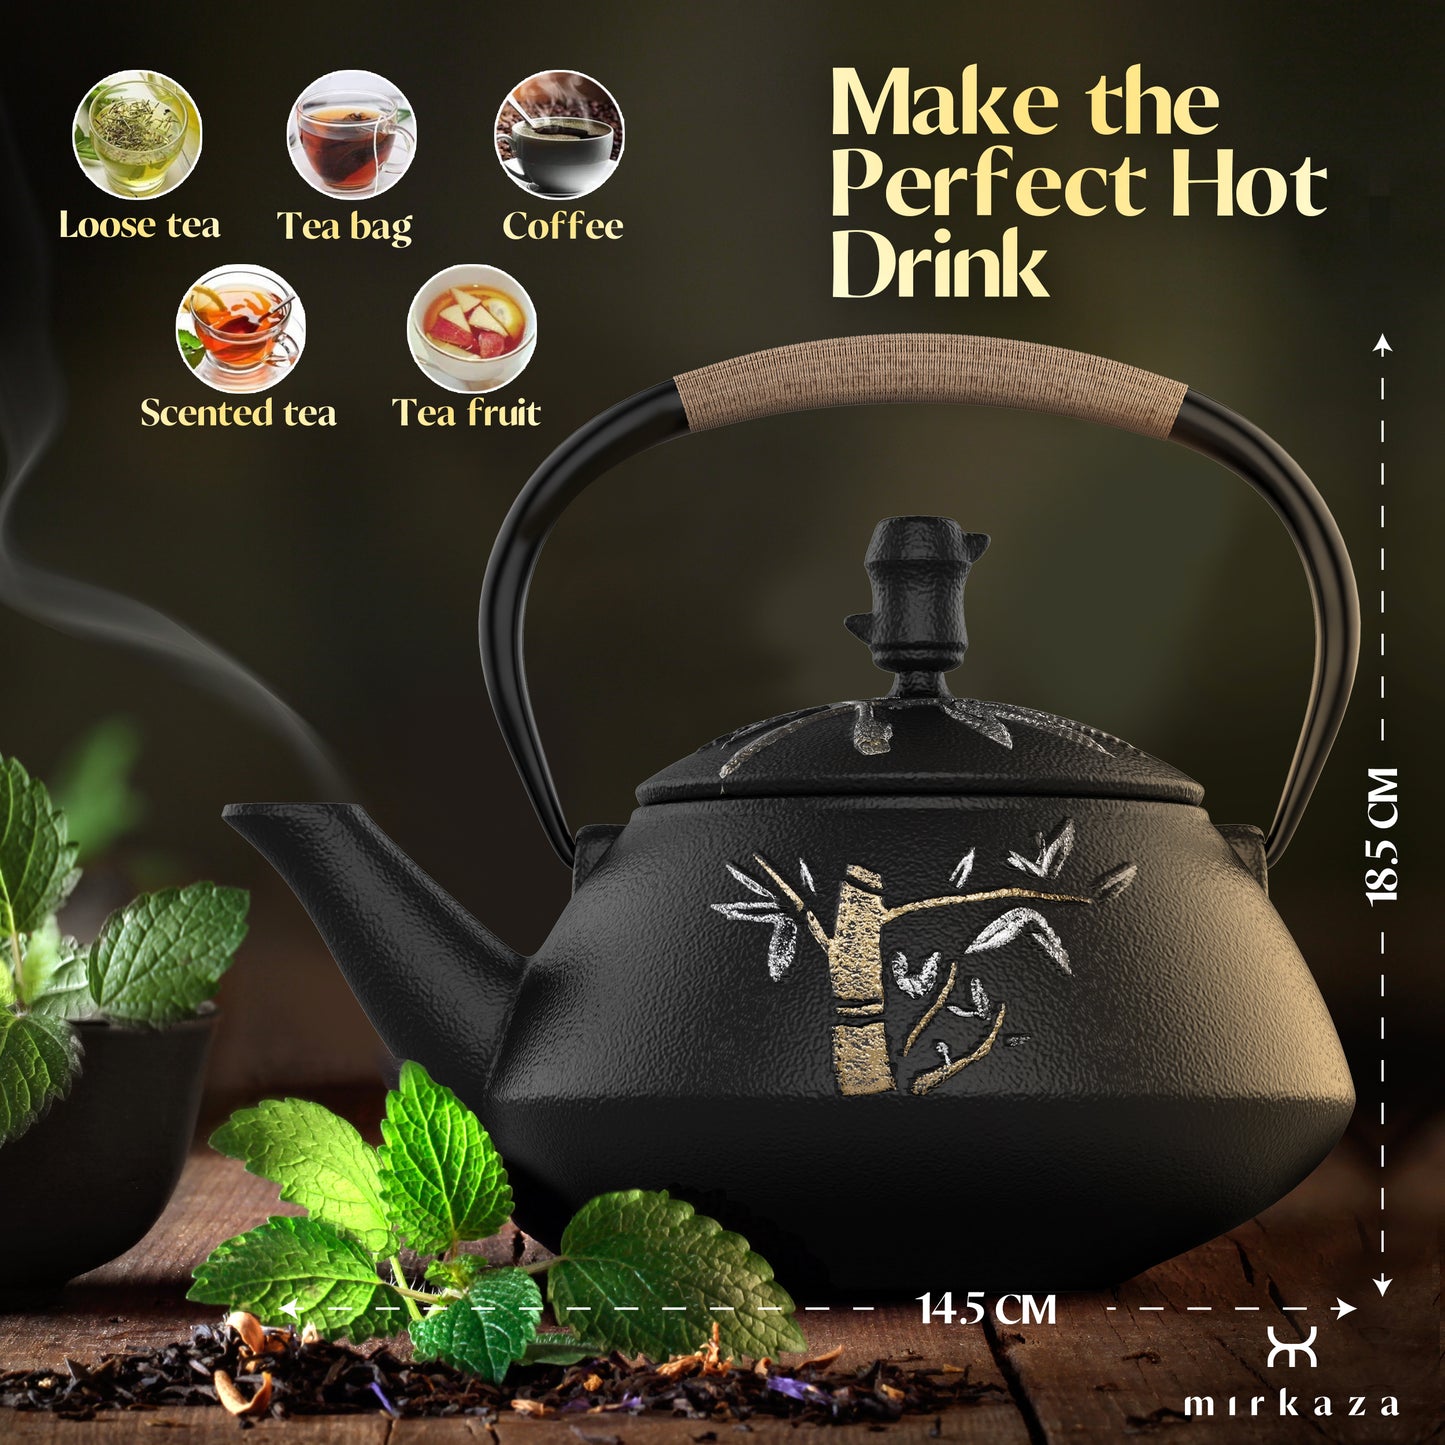 Coffee tea sets japanese iron tea pot with stainless steel infuser cast  iron teapot tea kettle for boiling